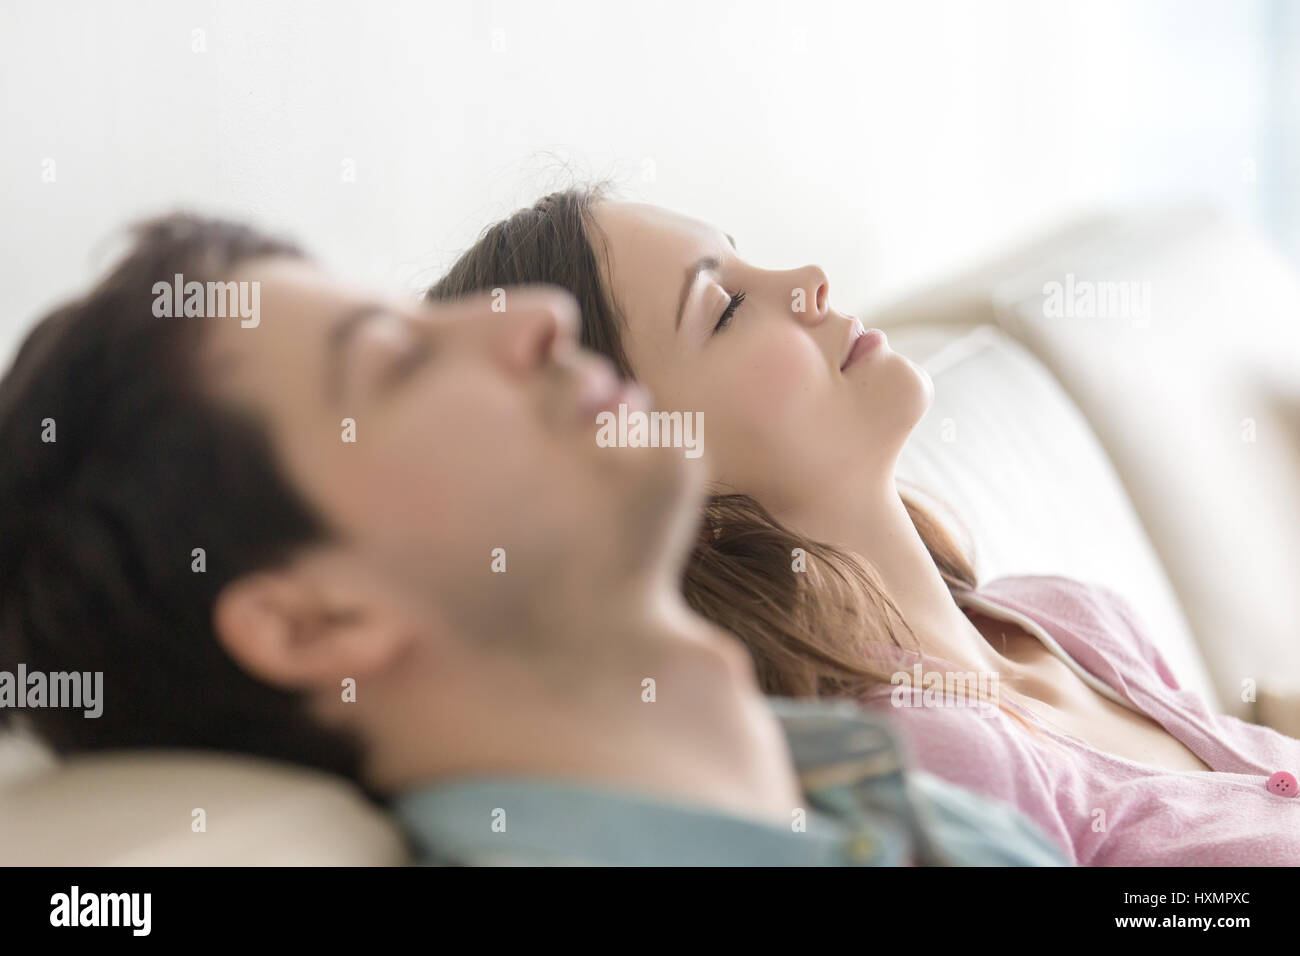 Happy young people relaxing with eyes closed, enjoying, side vie Stock Photo